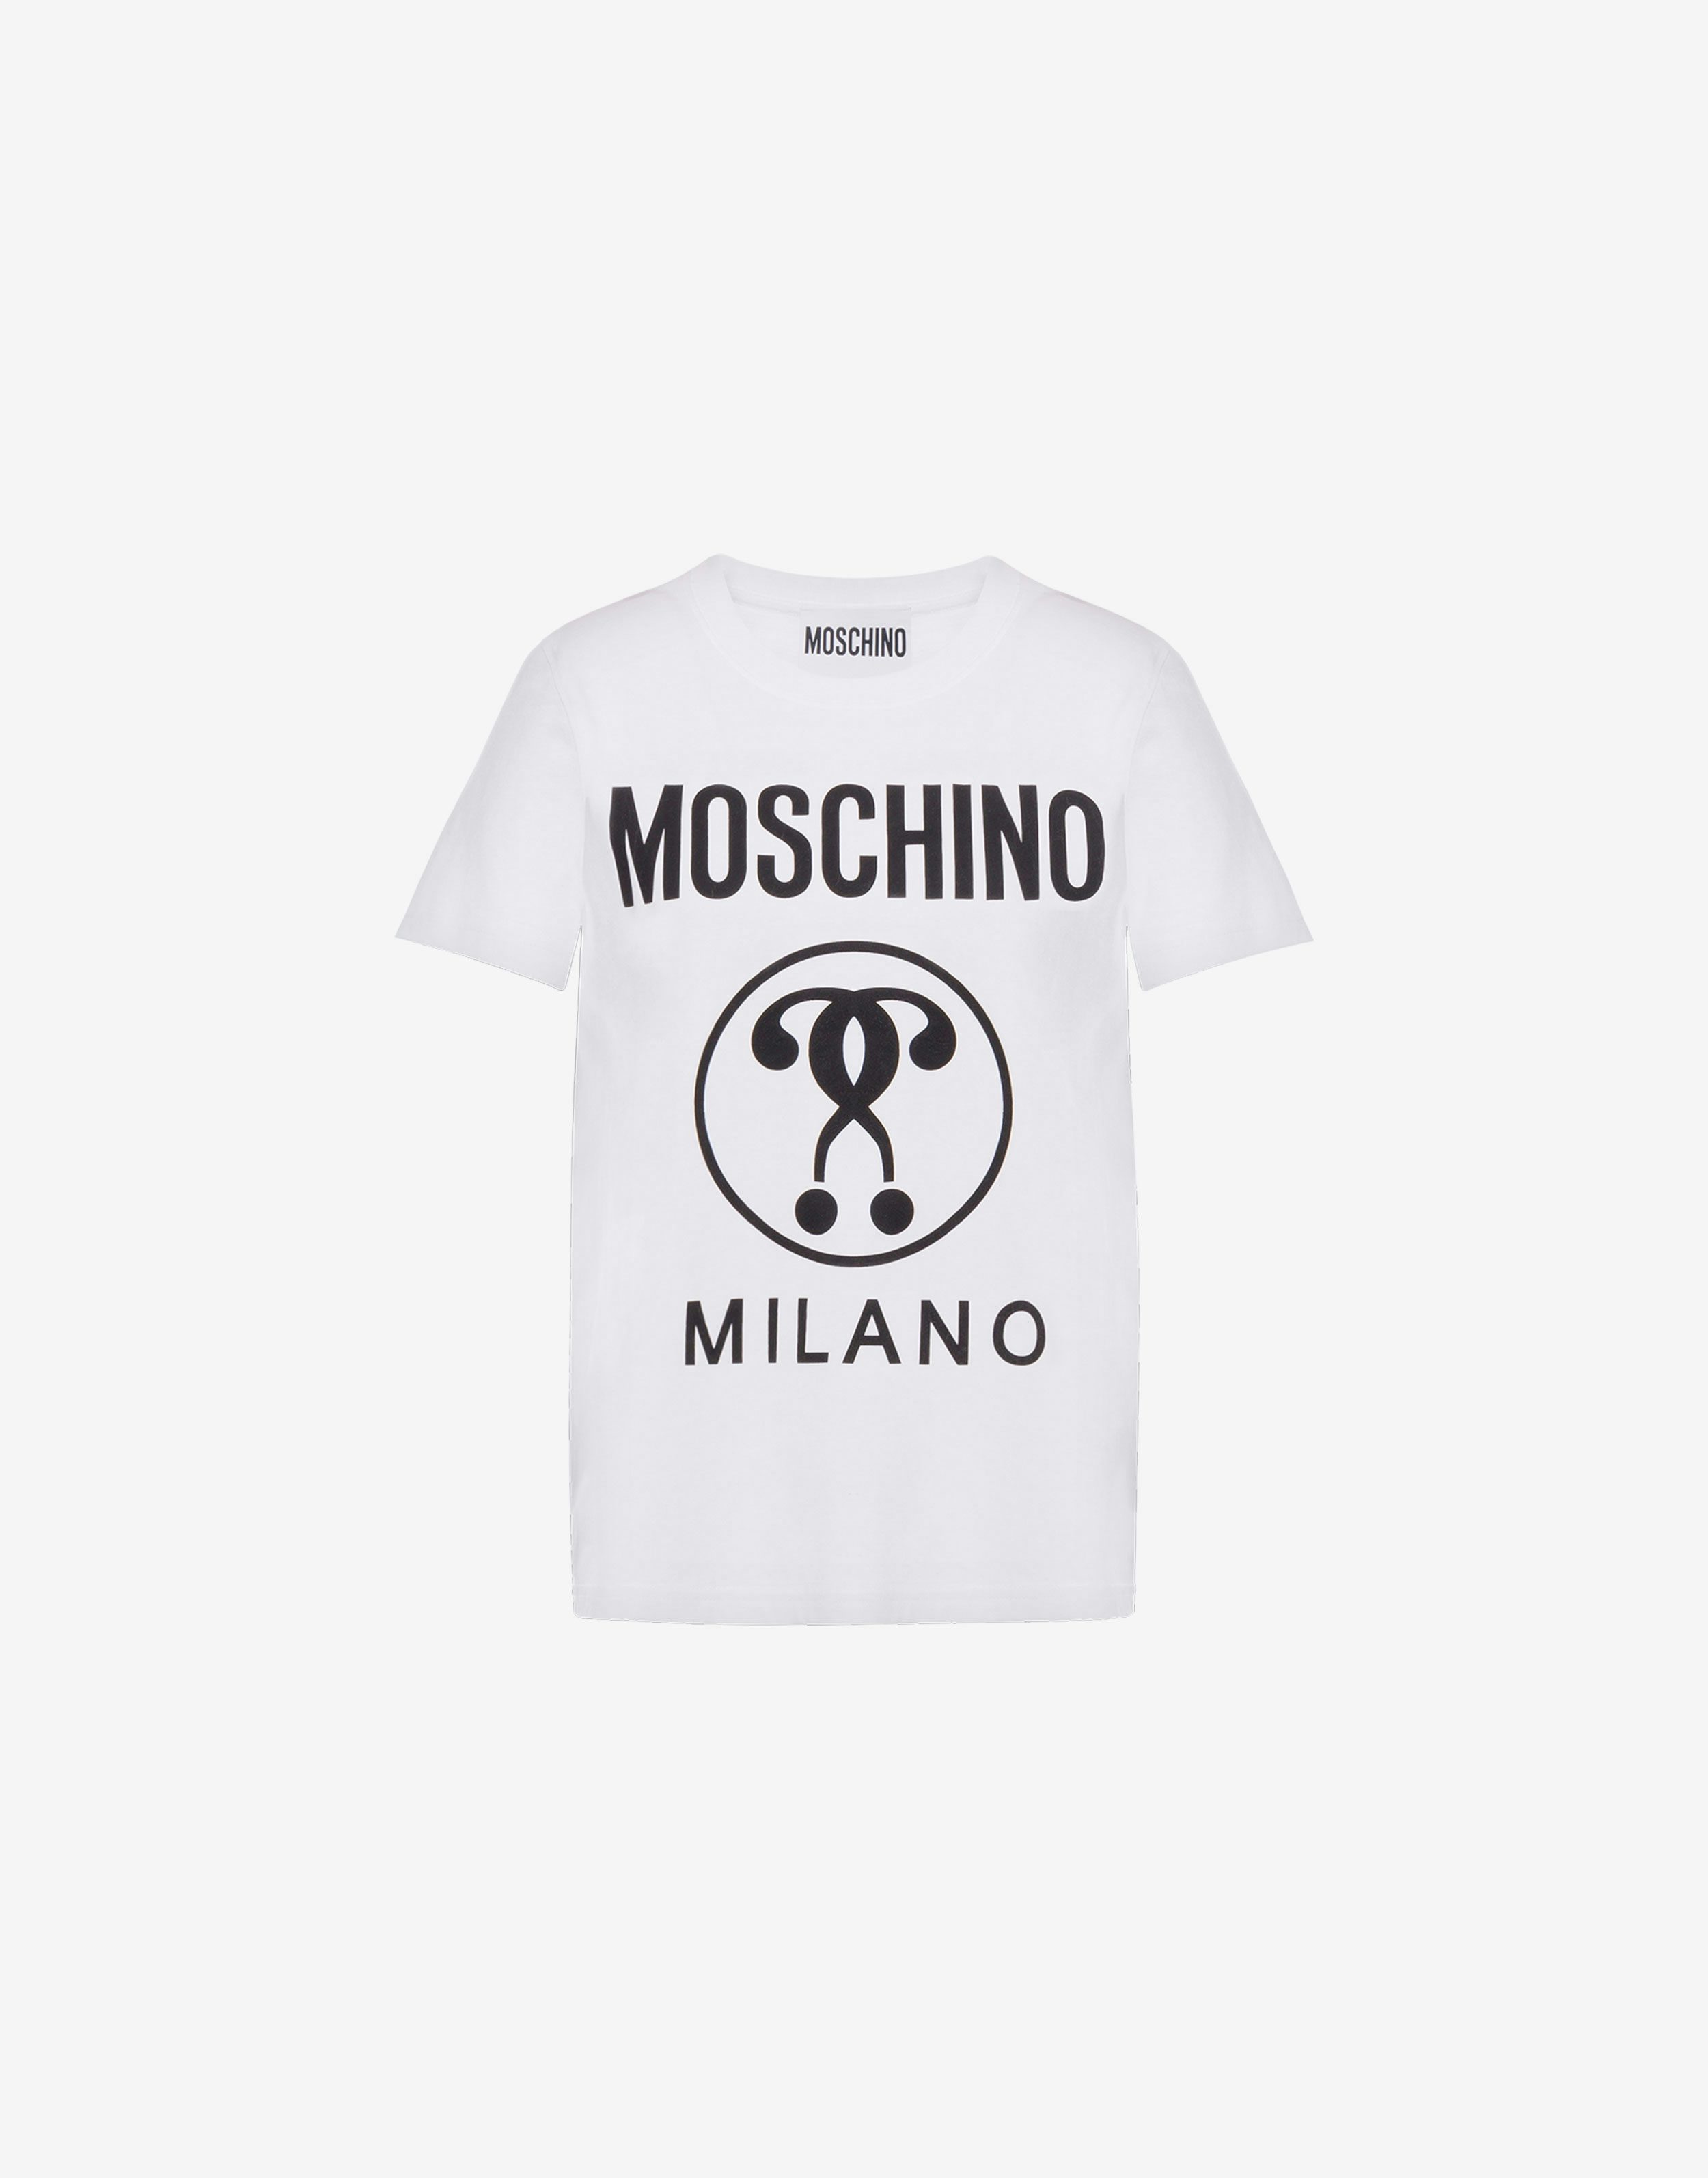 Moschino T-shirts for Sale - Official Store